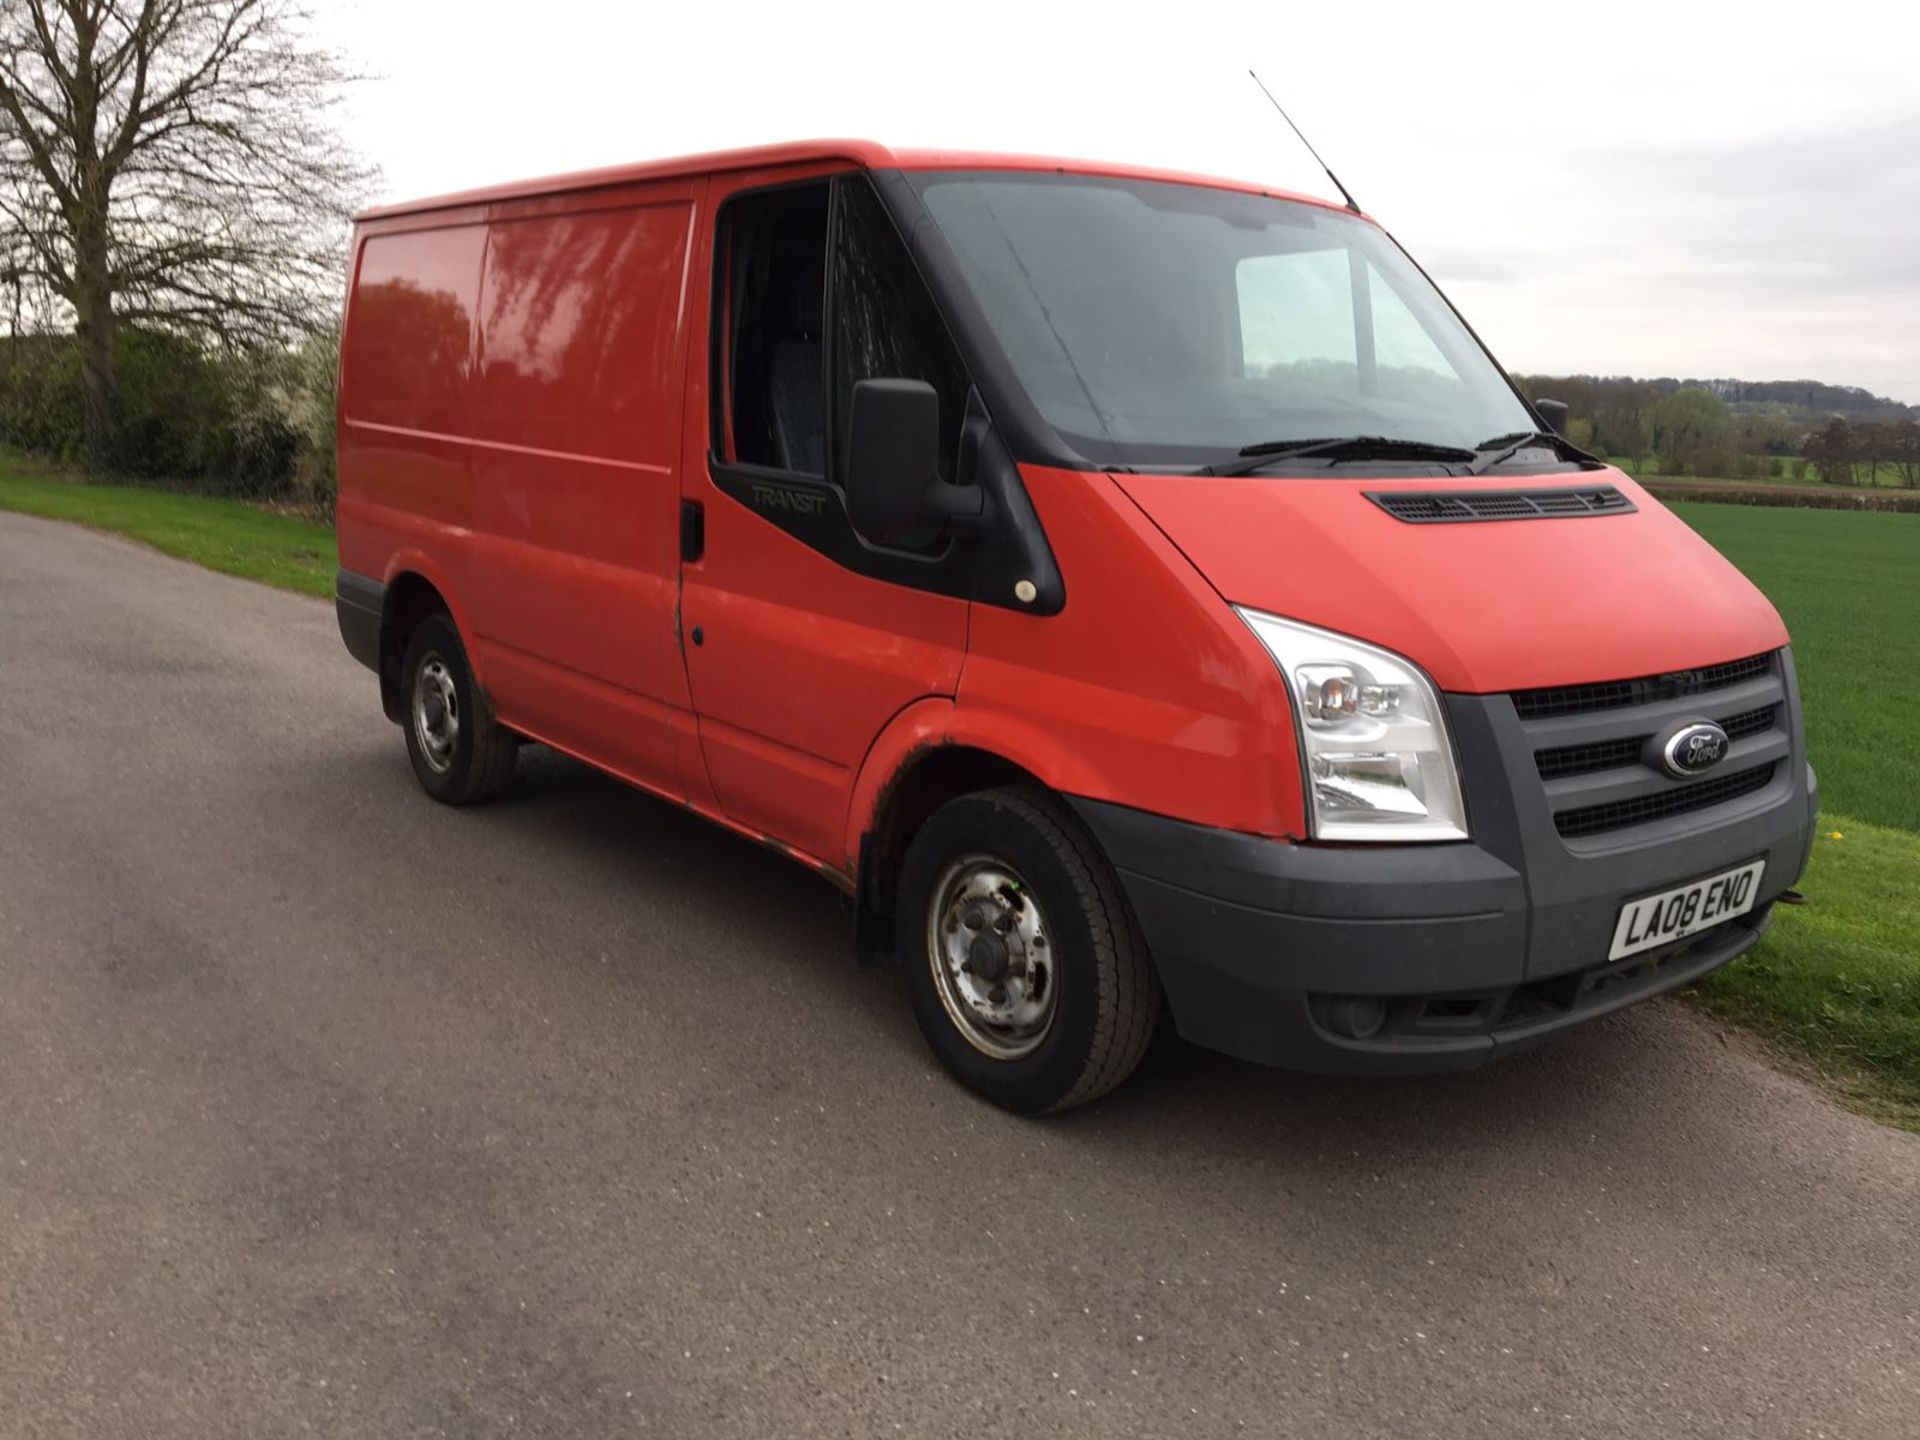 2008/08 REG FORD TRANSIT 85 T260S FWD, SHOWING 1 OWNER - ROYAL MAIL!